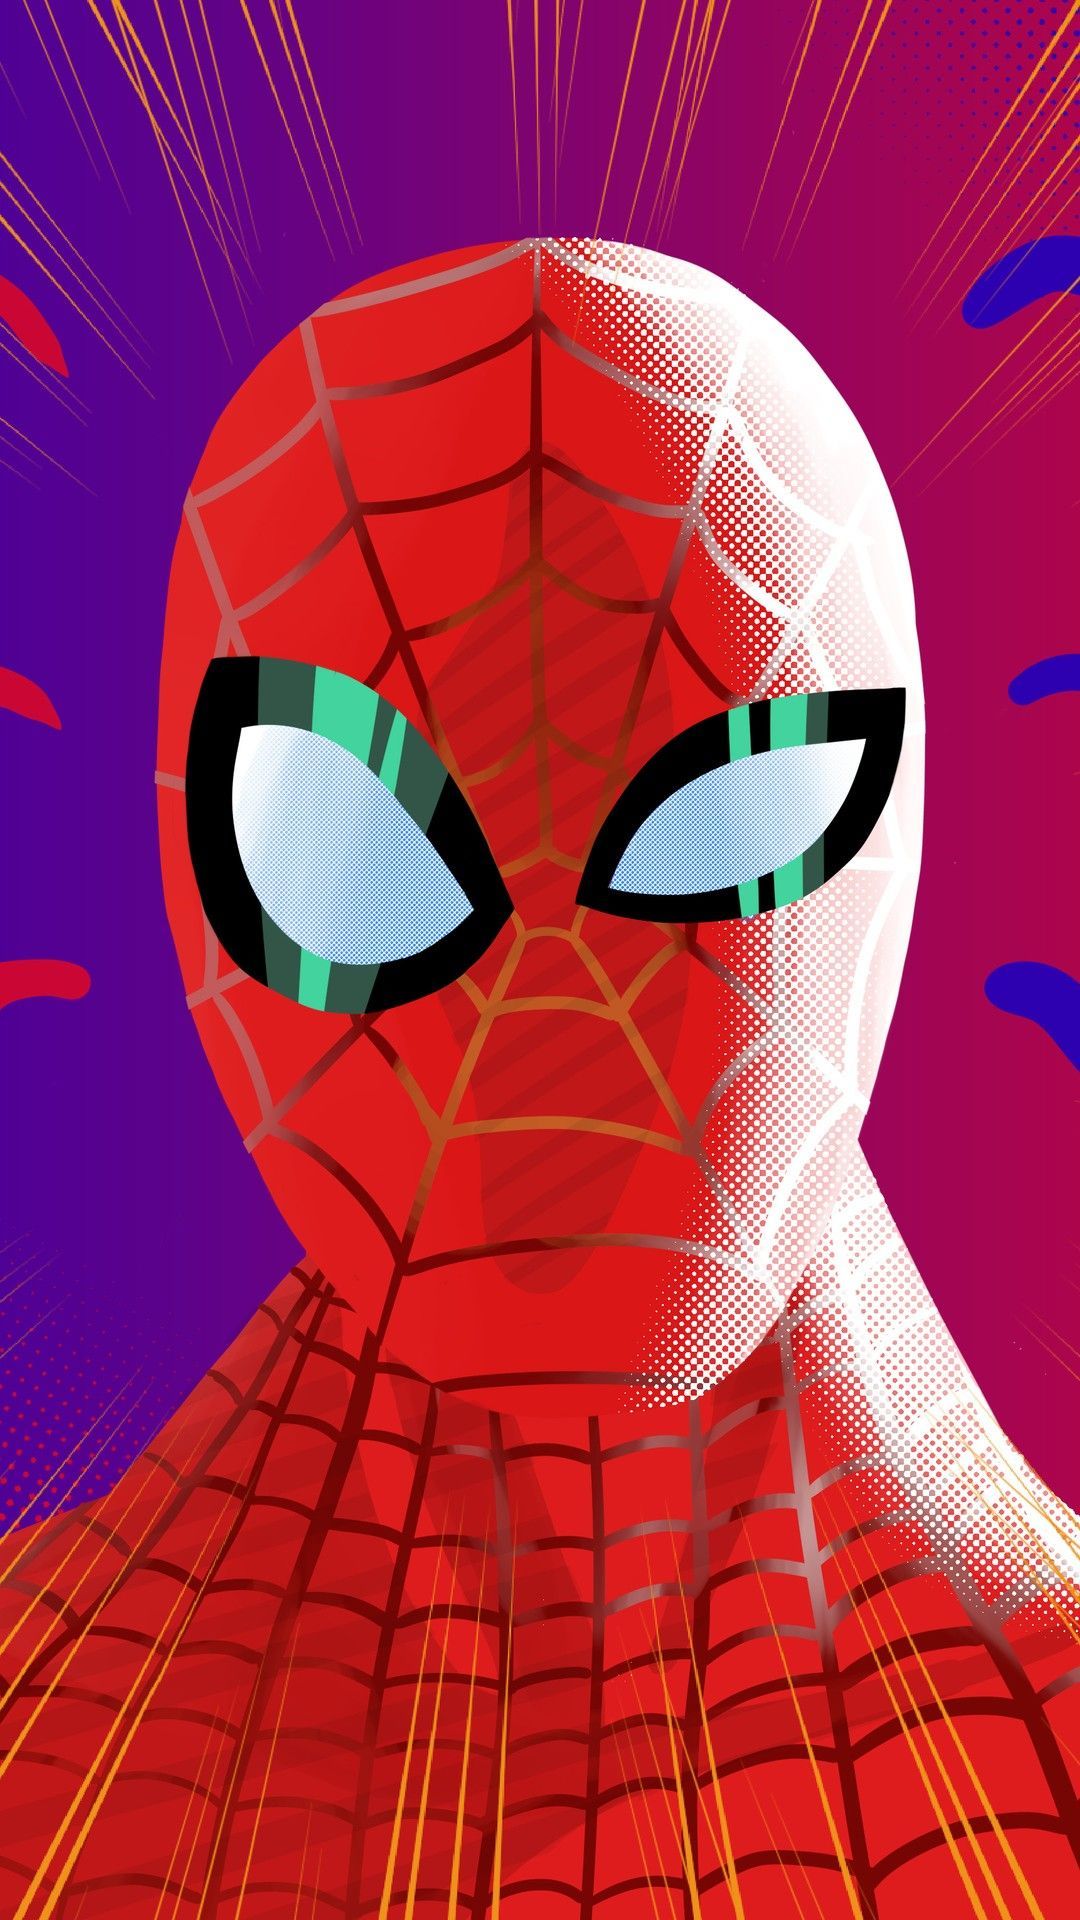 New Spectacular SpiderMan Wallpapers Plus Mobile Version 3d Model   rspectacularmemes